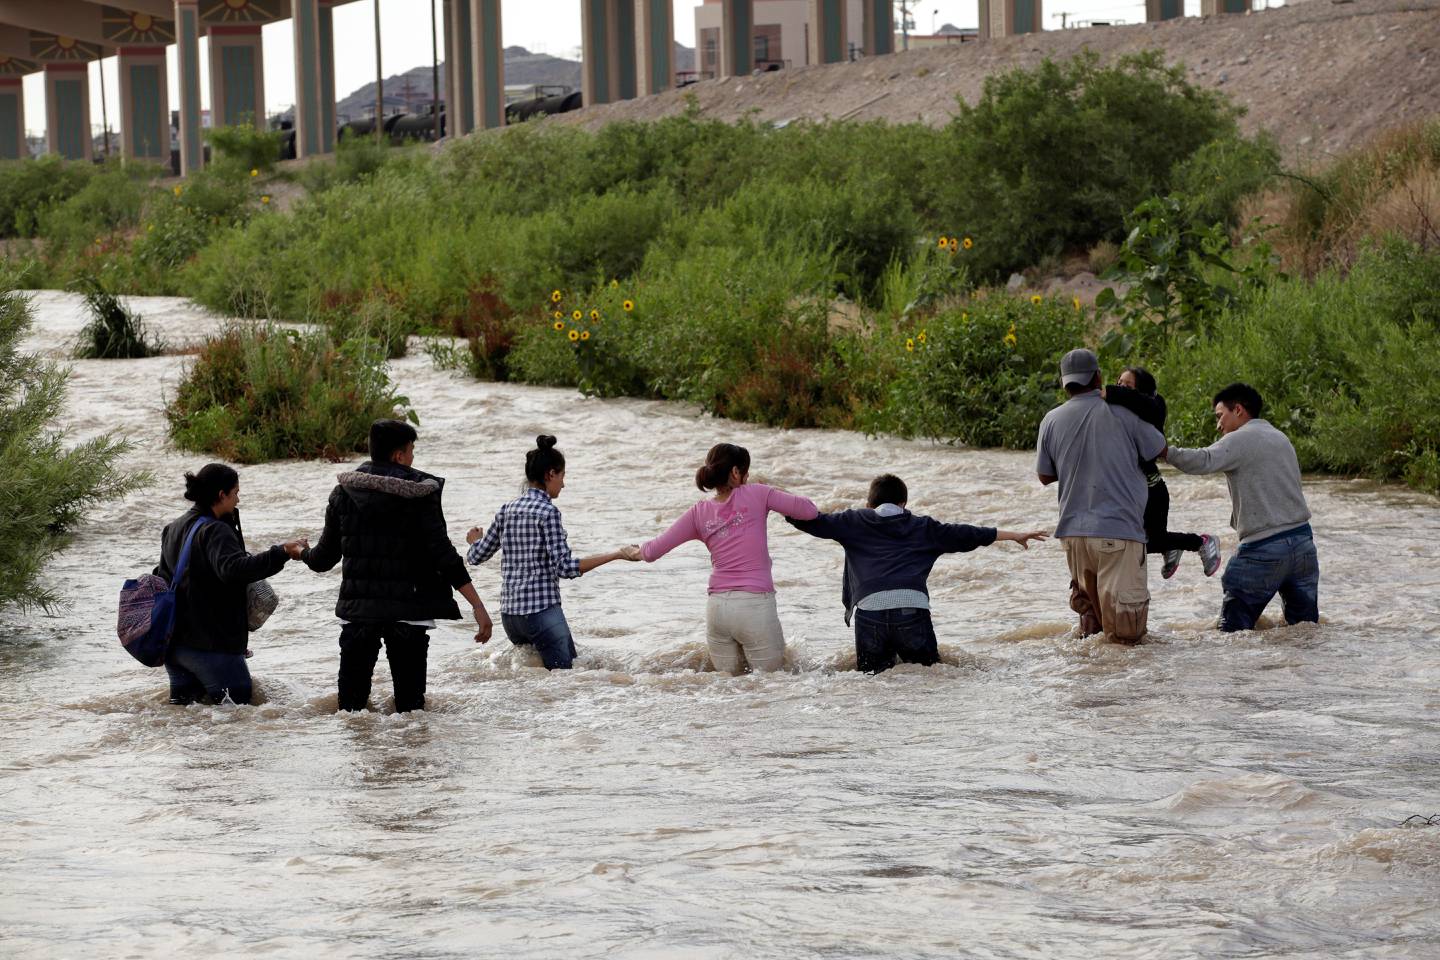 Migrants from Central America form a human chain to cross the Rio Bravo river to enter illegally into the United States to turn themselves in to request for asylum in El Paso, Texas, U.S., as seen from Ciudad Juarez, Mexico June 11, 2019. Picture taken June 11, 2019. REUTERS/Jose Luis Gonzalez